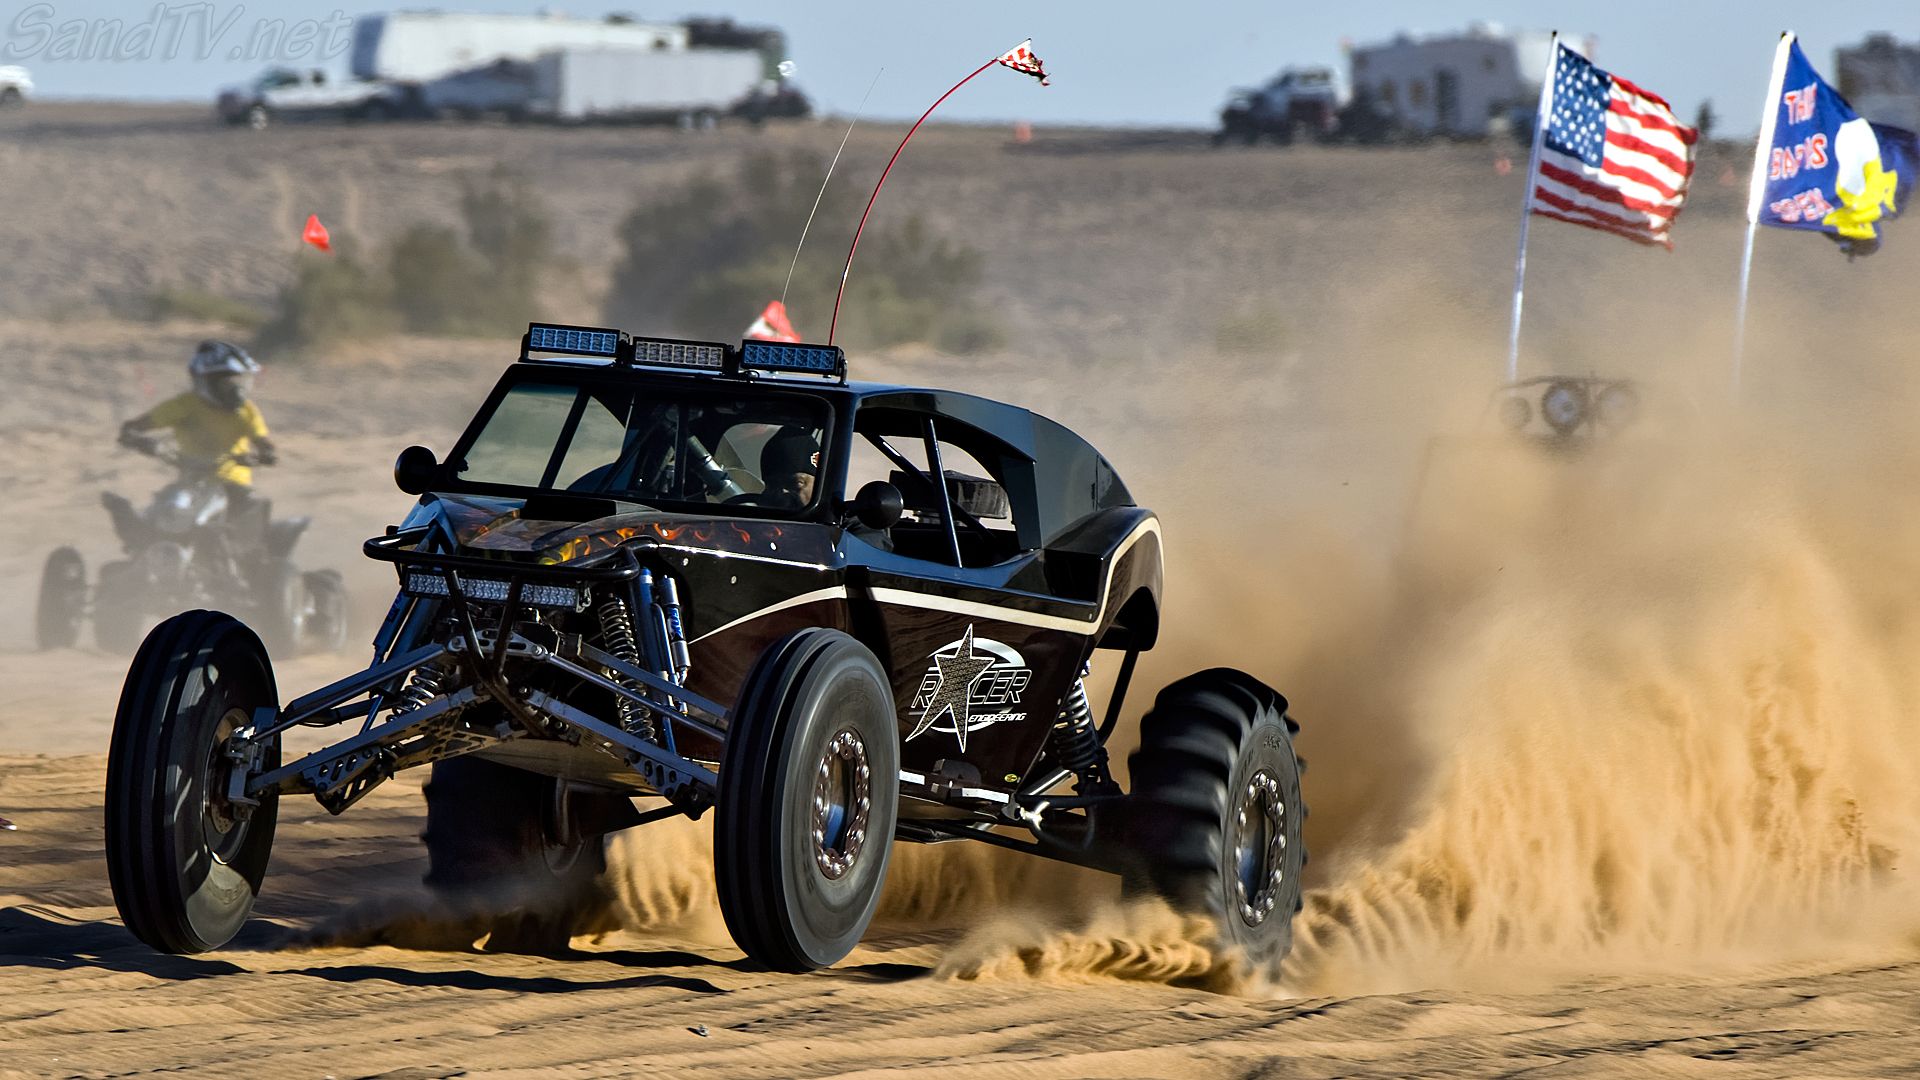 Glamis Dunes Sand Drags Photo Sony A7R Tamron 150 600mm Lens